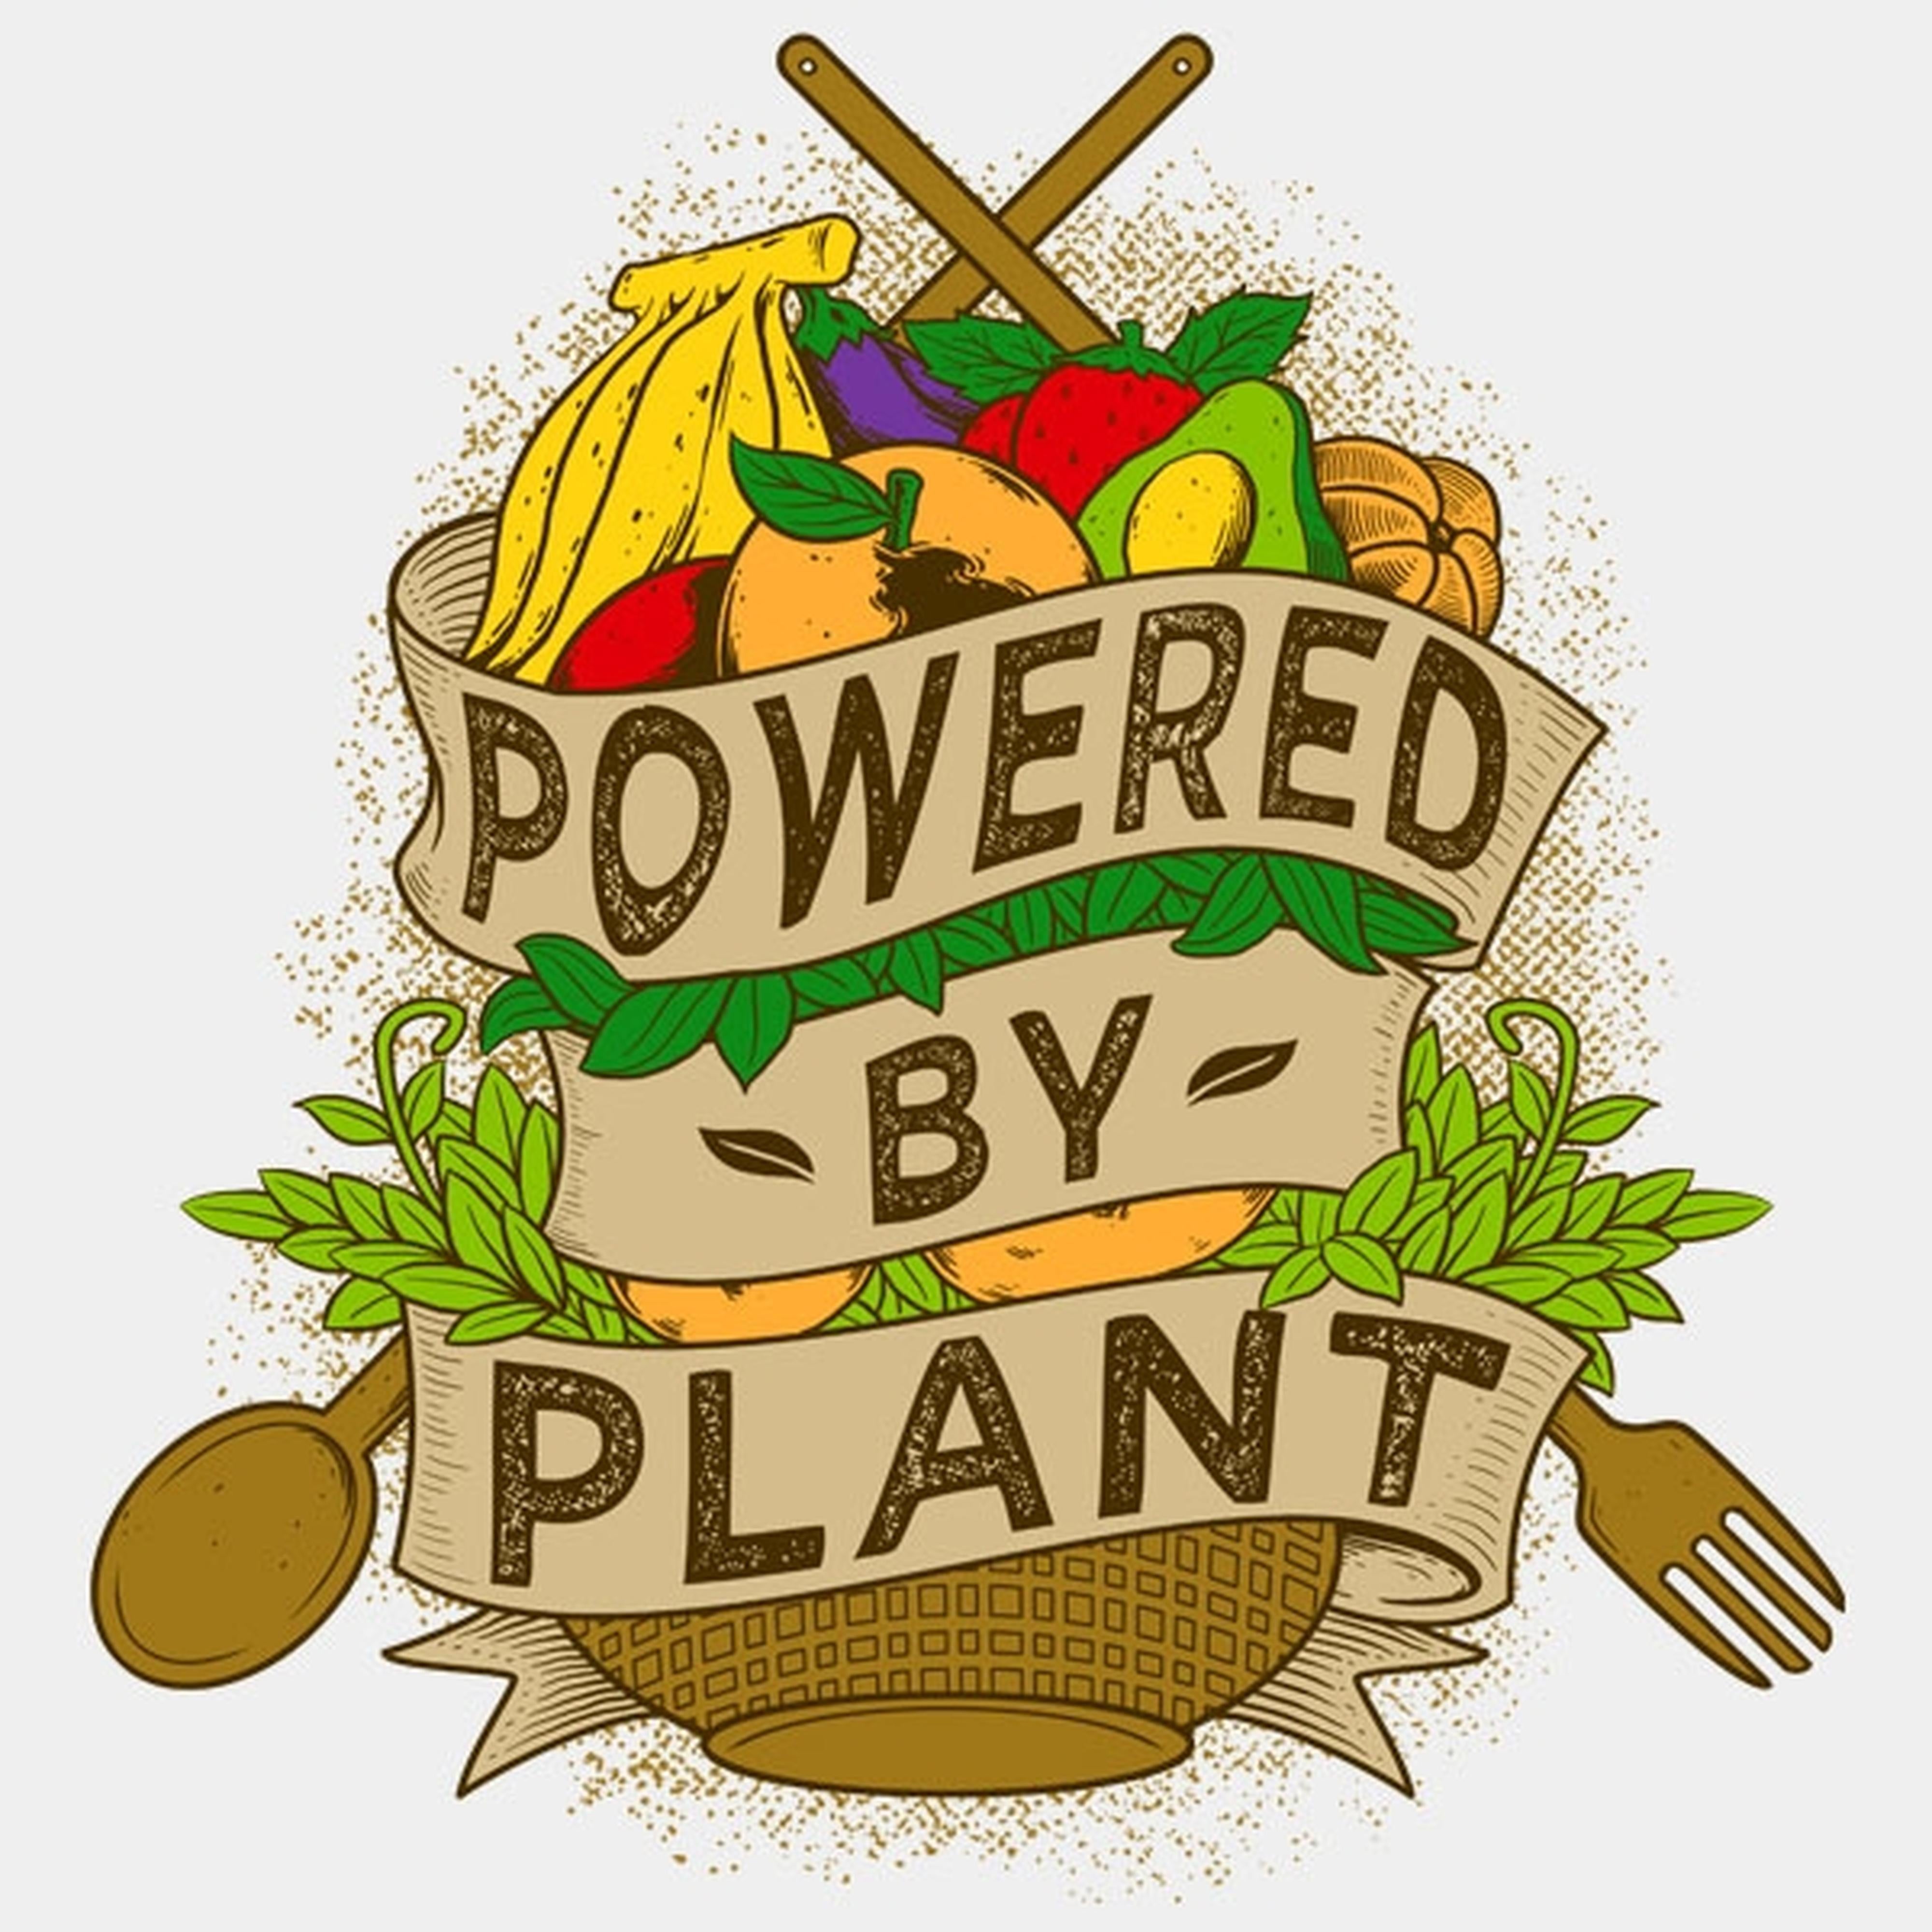 Powered by plant - T-shirt